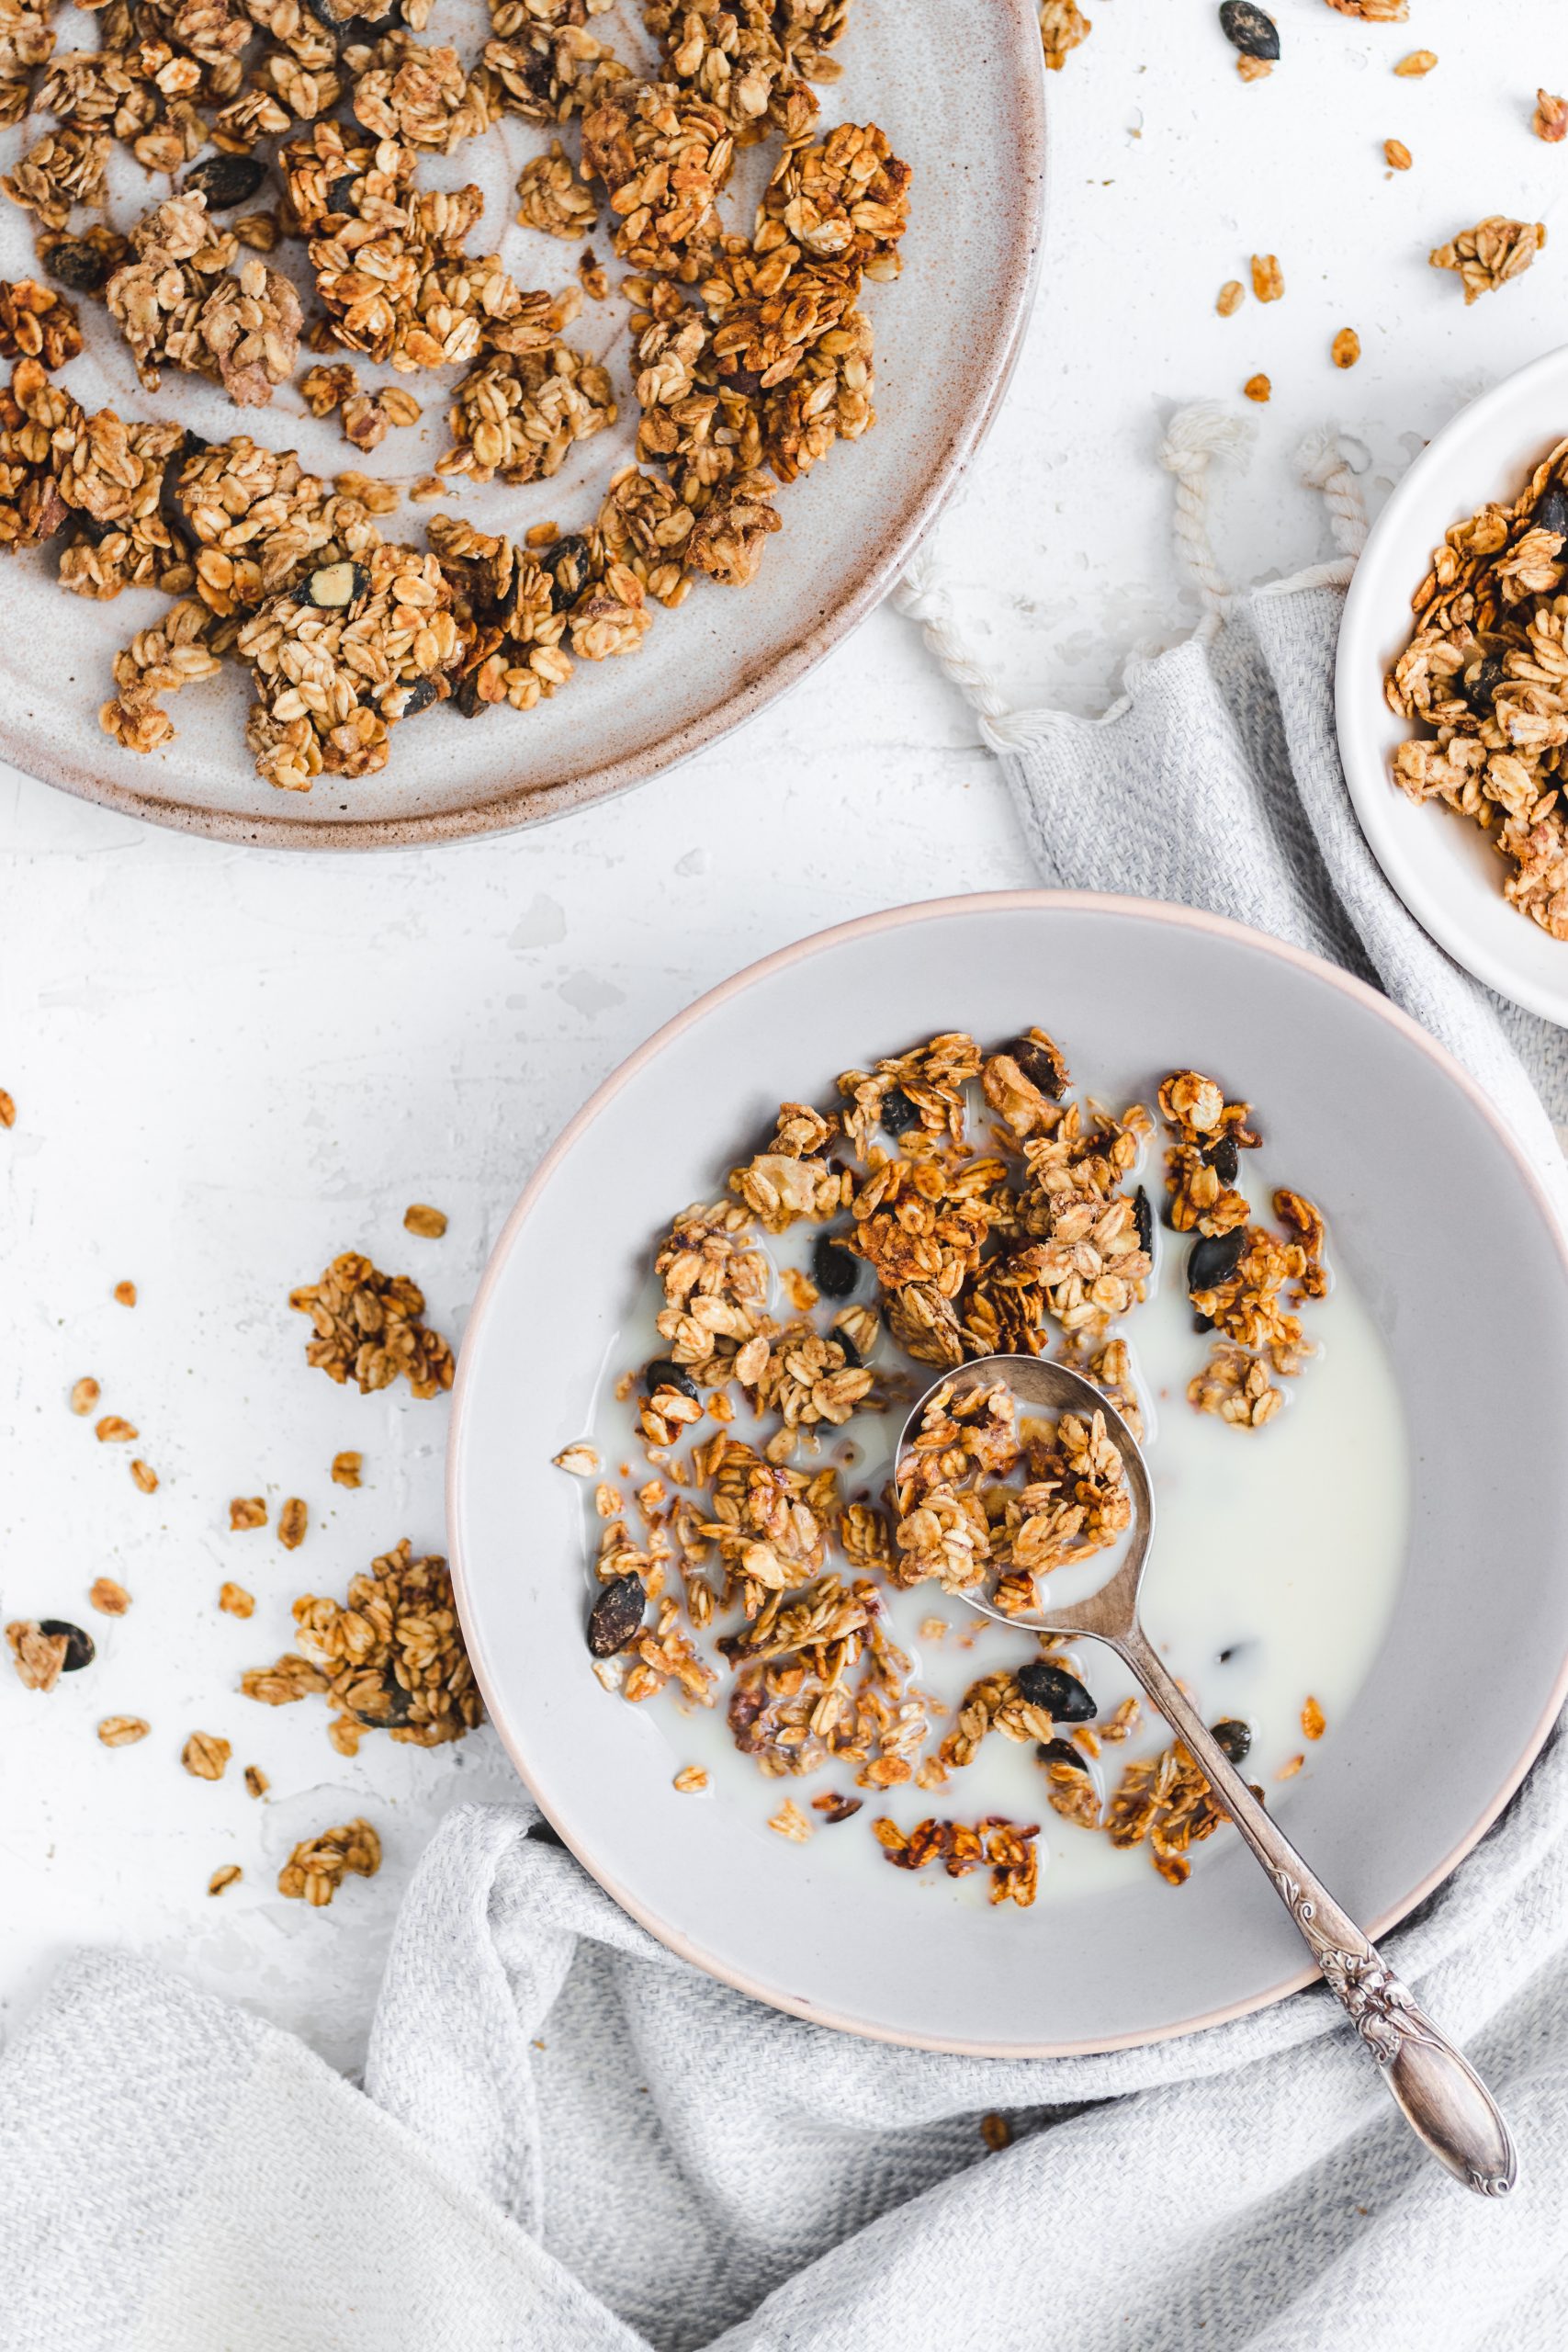 Oil Free Peanut Butter and Banana Granola in a bowl with milk, spoon taken out